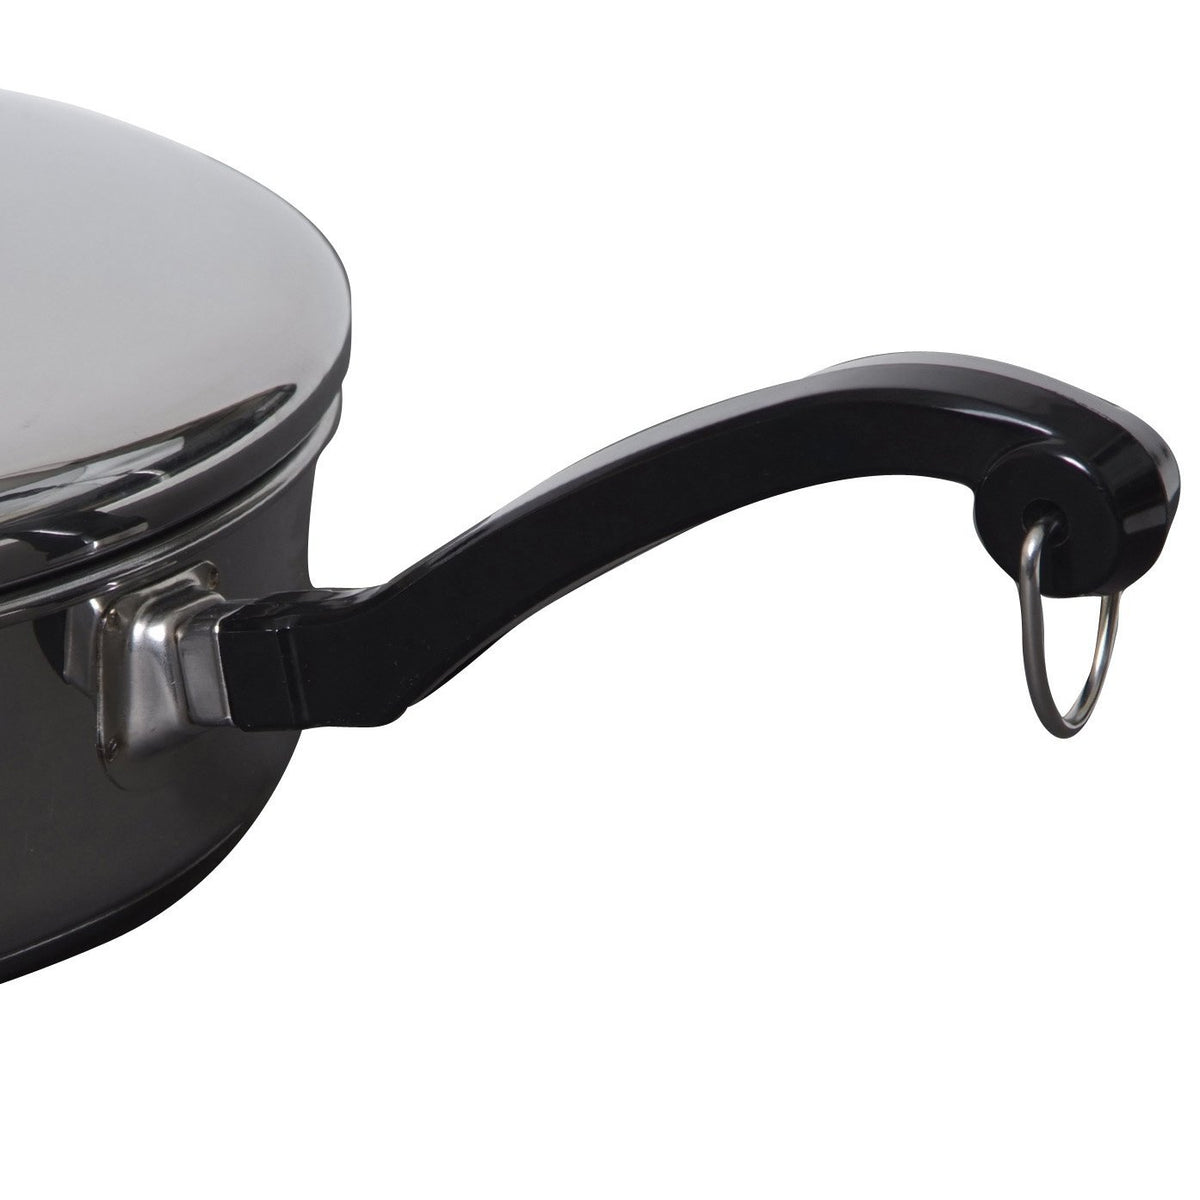 buy cooking pans & cookware at cheap rate in bulk. wholesale & retail kitchen goods & supplies store.